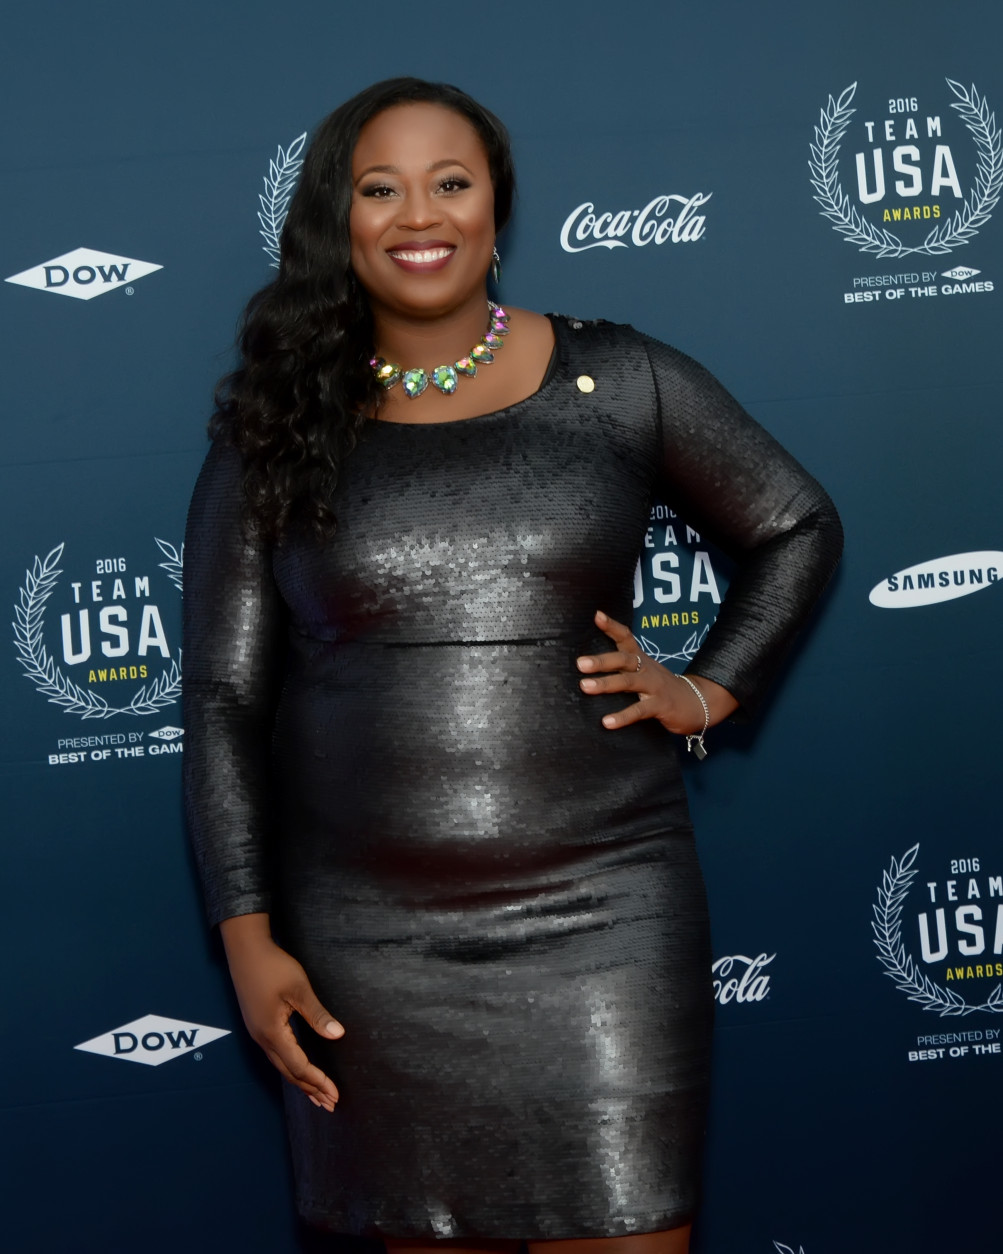 Shot putter and gold medalist Michelle Carter on the red carpet. (Courtesy Shannon Finney, <a href="http://www.shannonfinneyphotography.com">www.shannonfinneyphotography.com</a>)